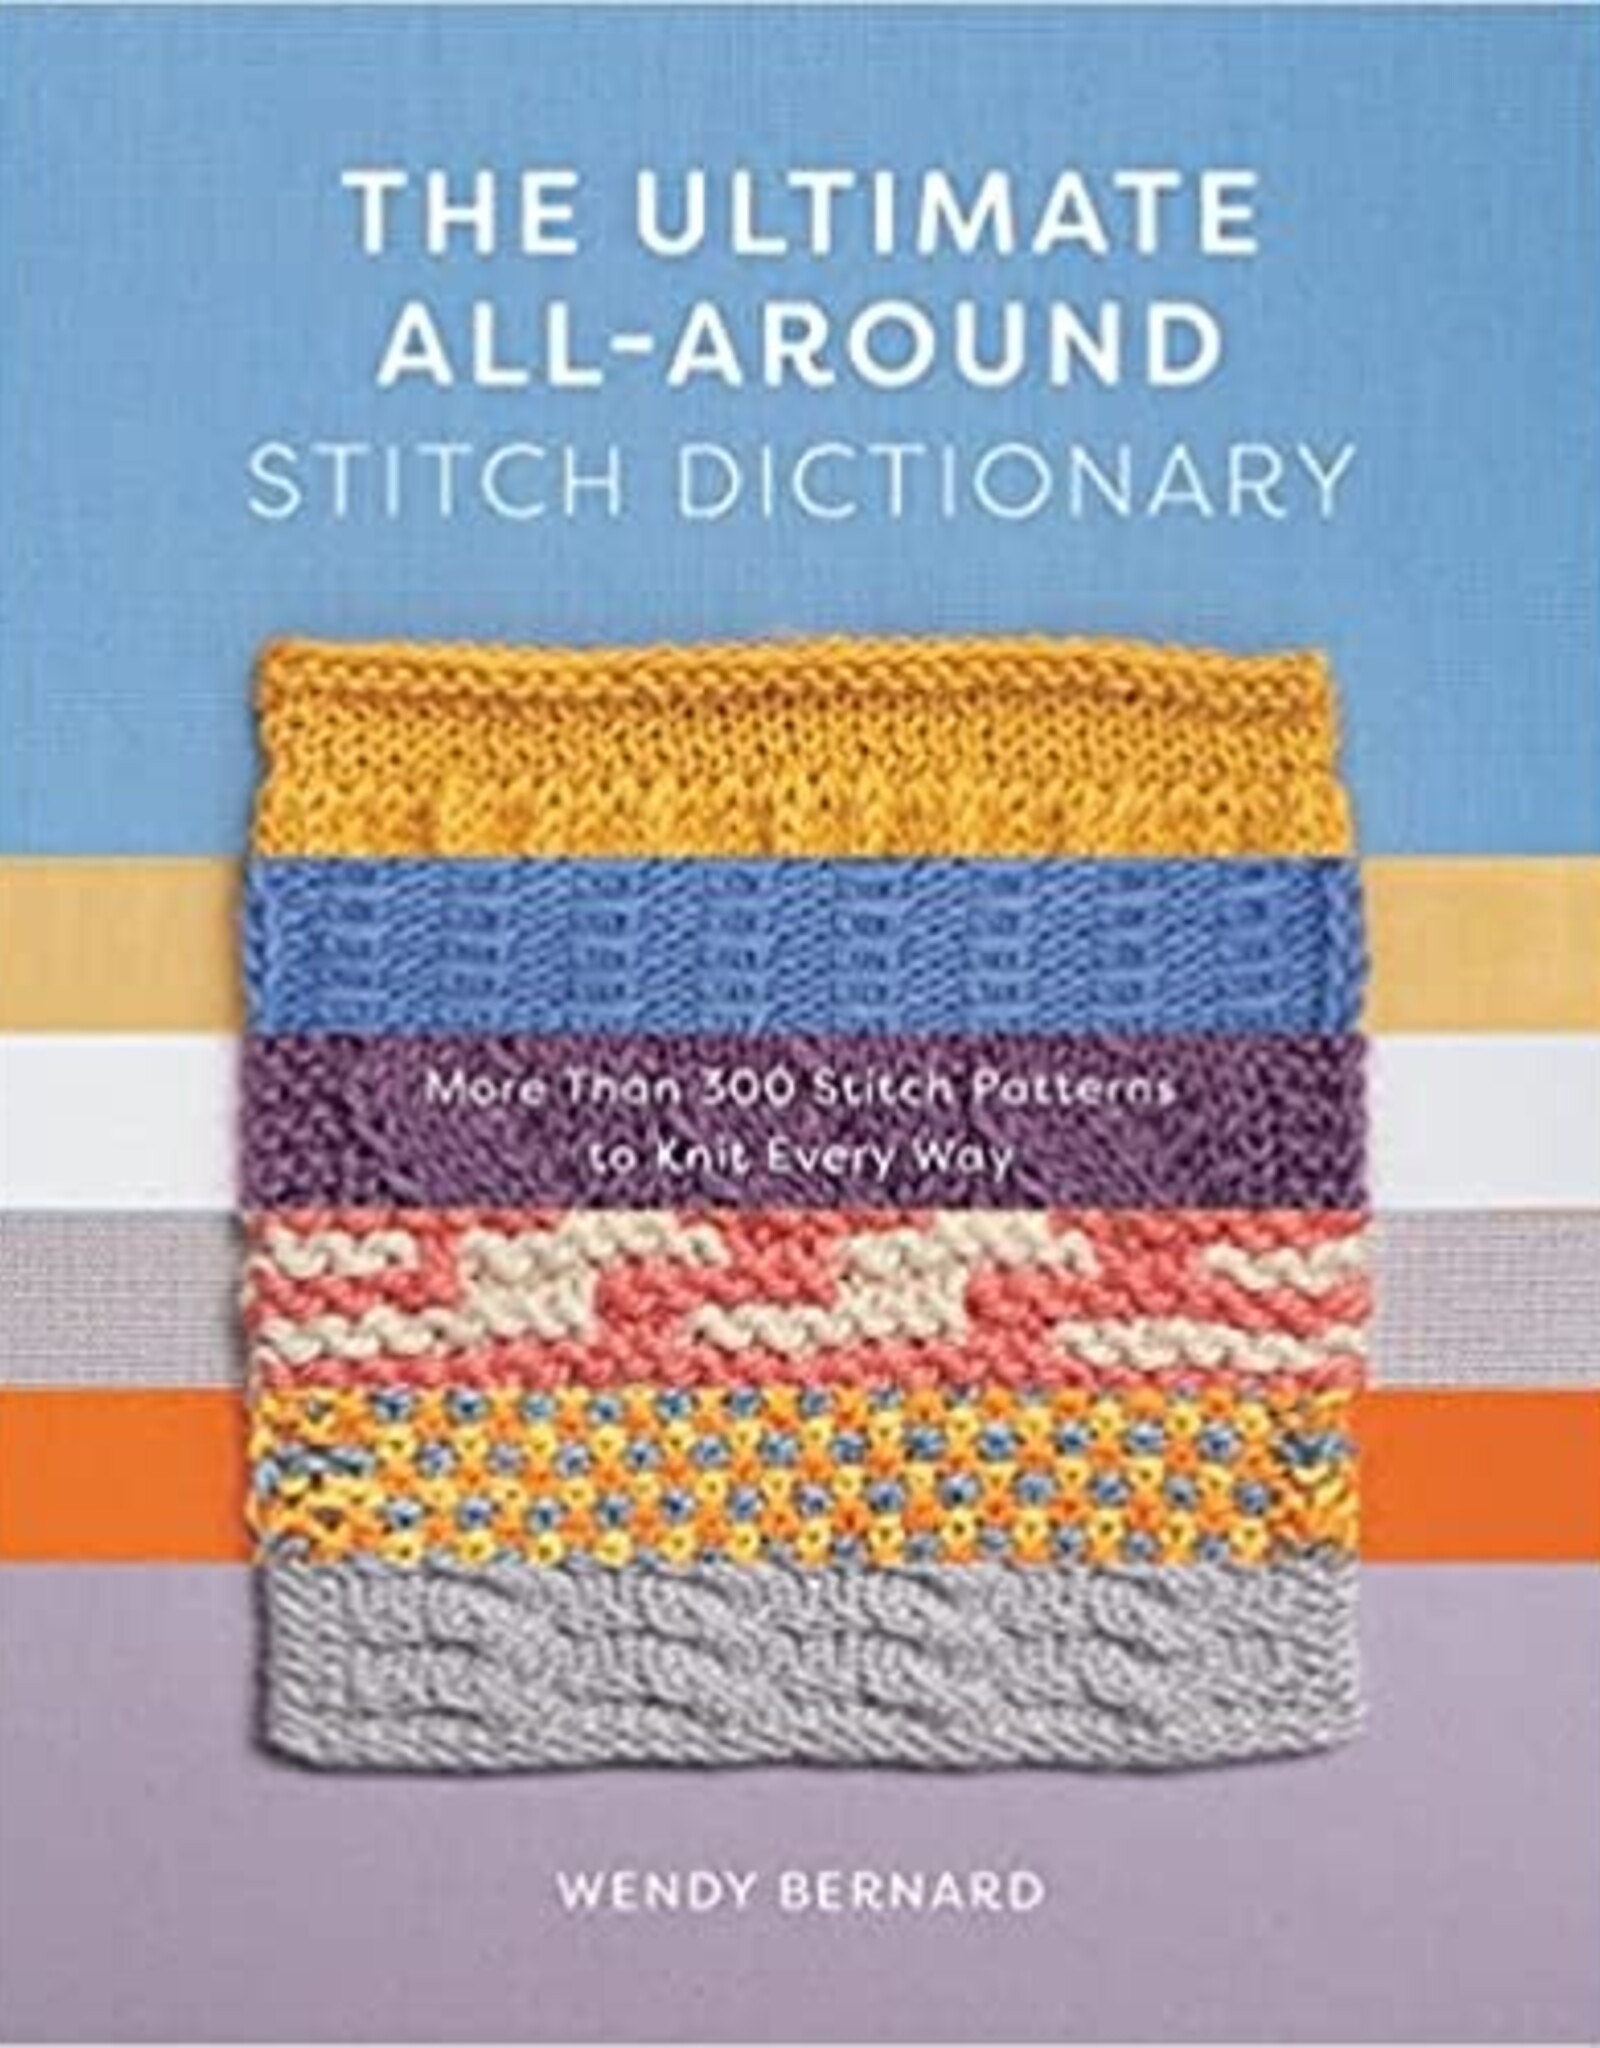 Hachette The Ultimate All-Around Stitch Dictionary: More Than 300 Stitch Patterns to Knit Every Way by Wendy Bernard